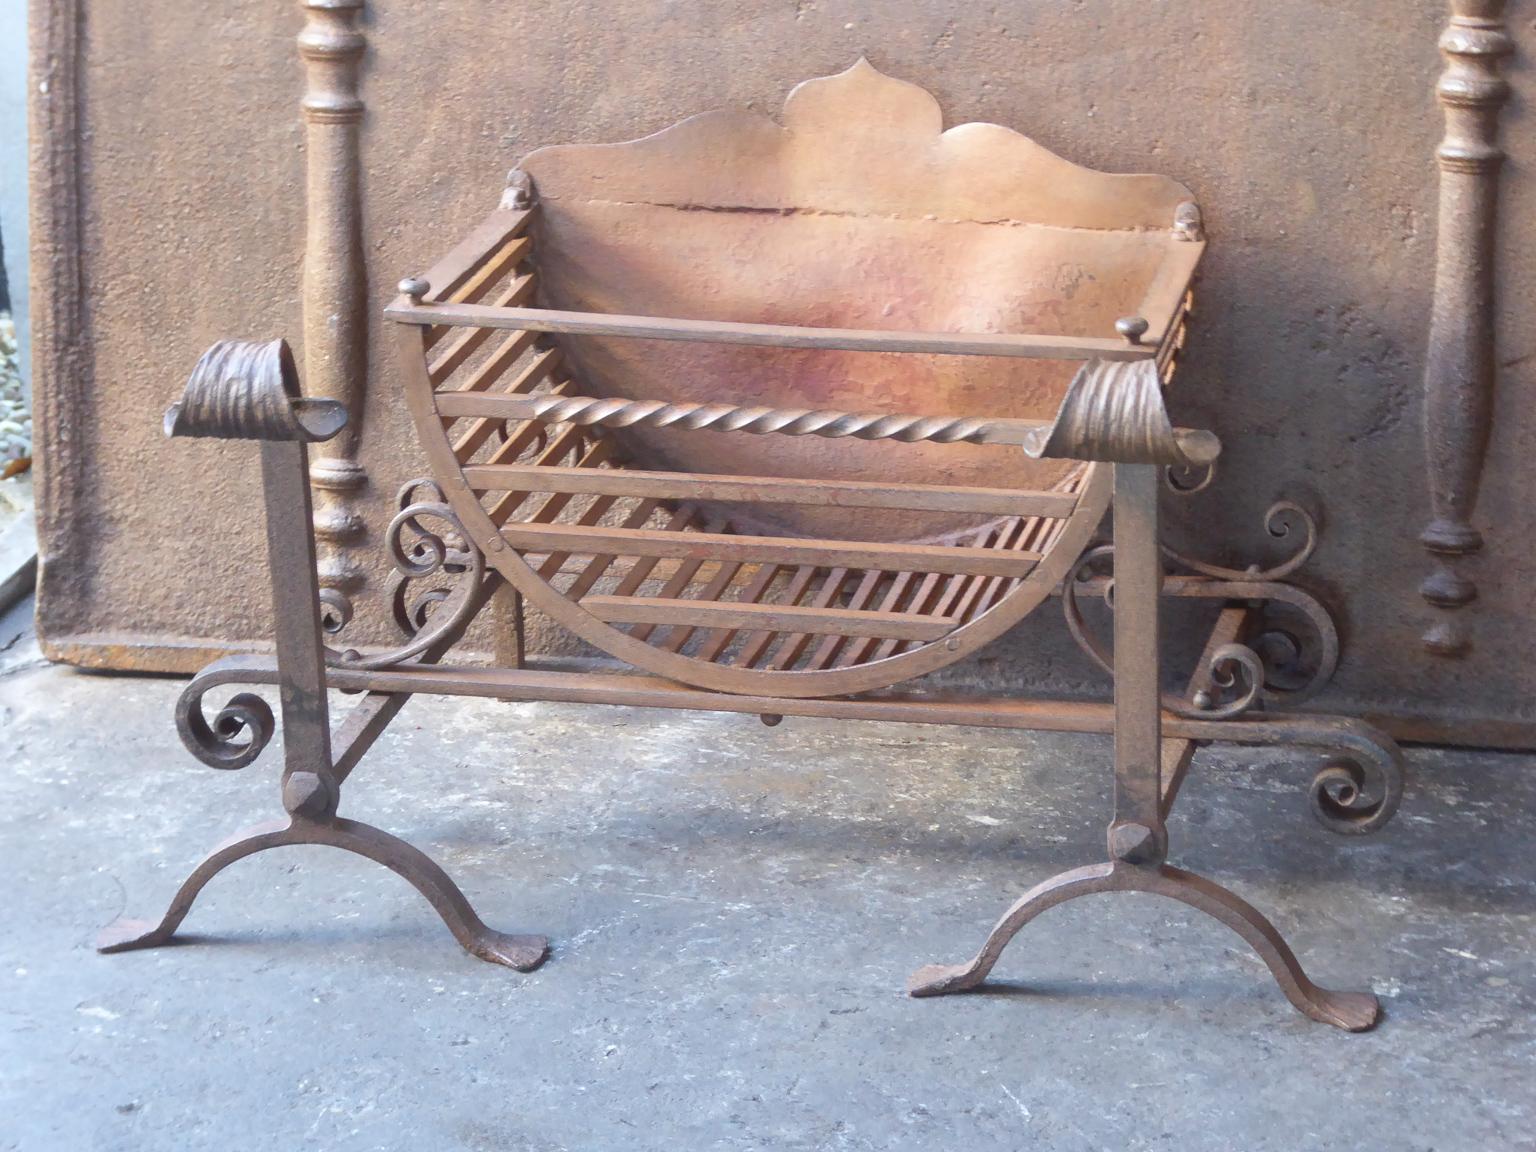 English Victorian style fireplace basket or fire basket. The fireplace grate is made of wrought iron. The grate has a natural brown patina. Upon request it can be made black. The total width of the front of the grate is 29 inch (74 cm).

The